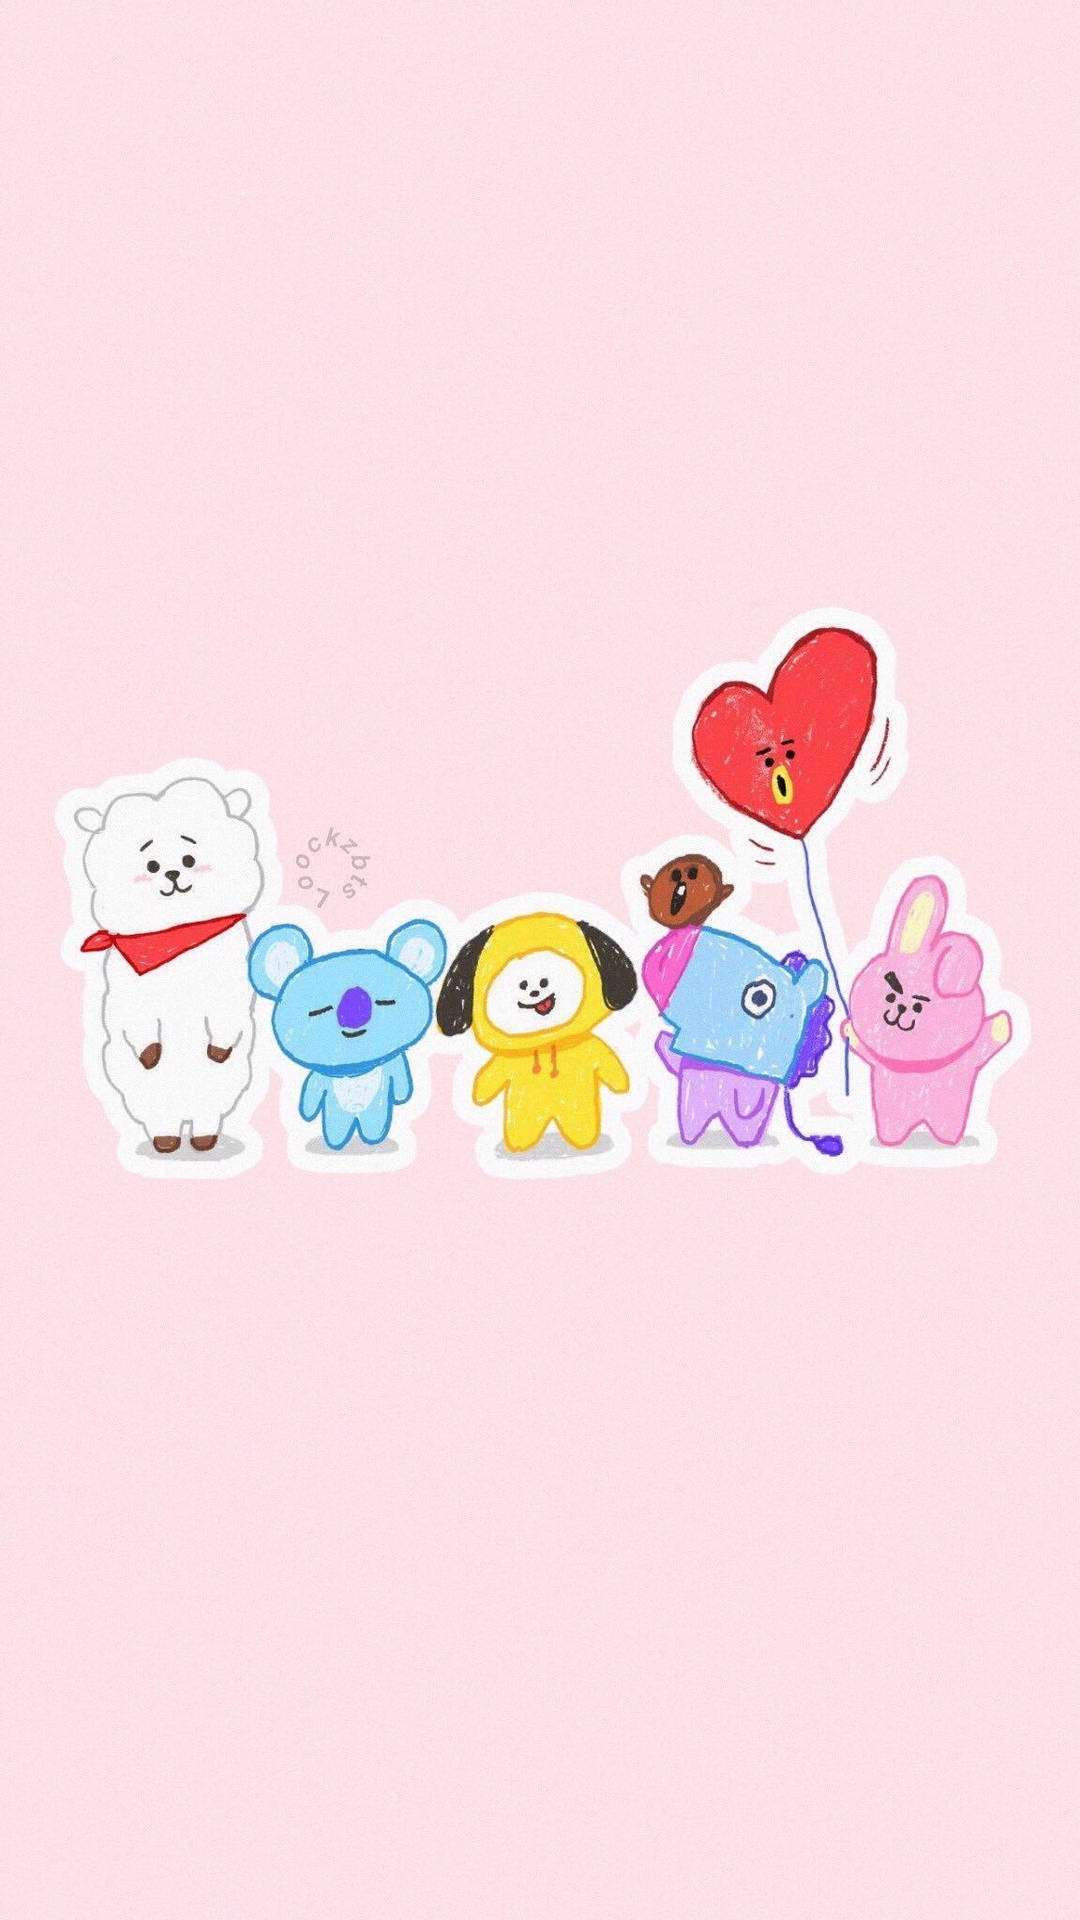 Bt21 1152X2048 Wallpaper and Background Image